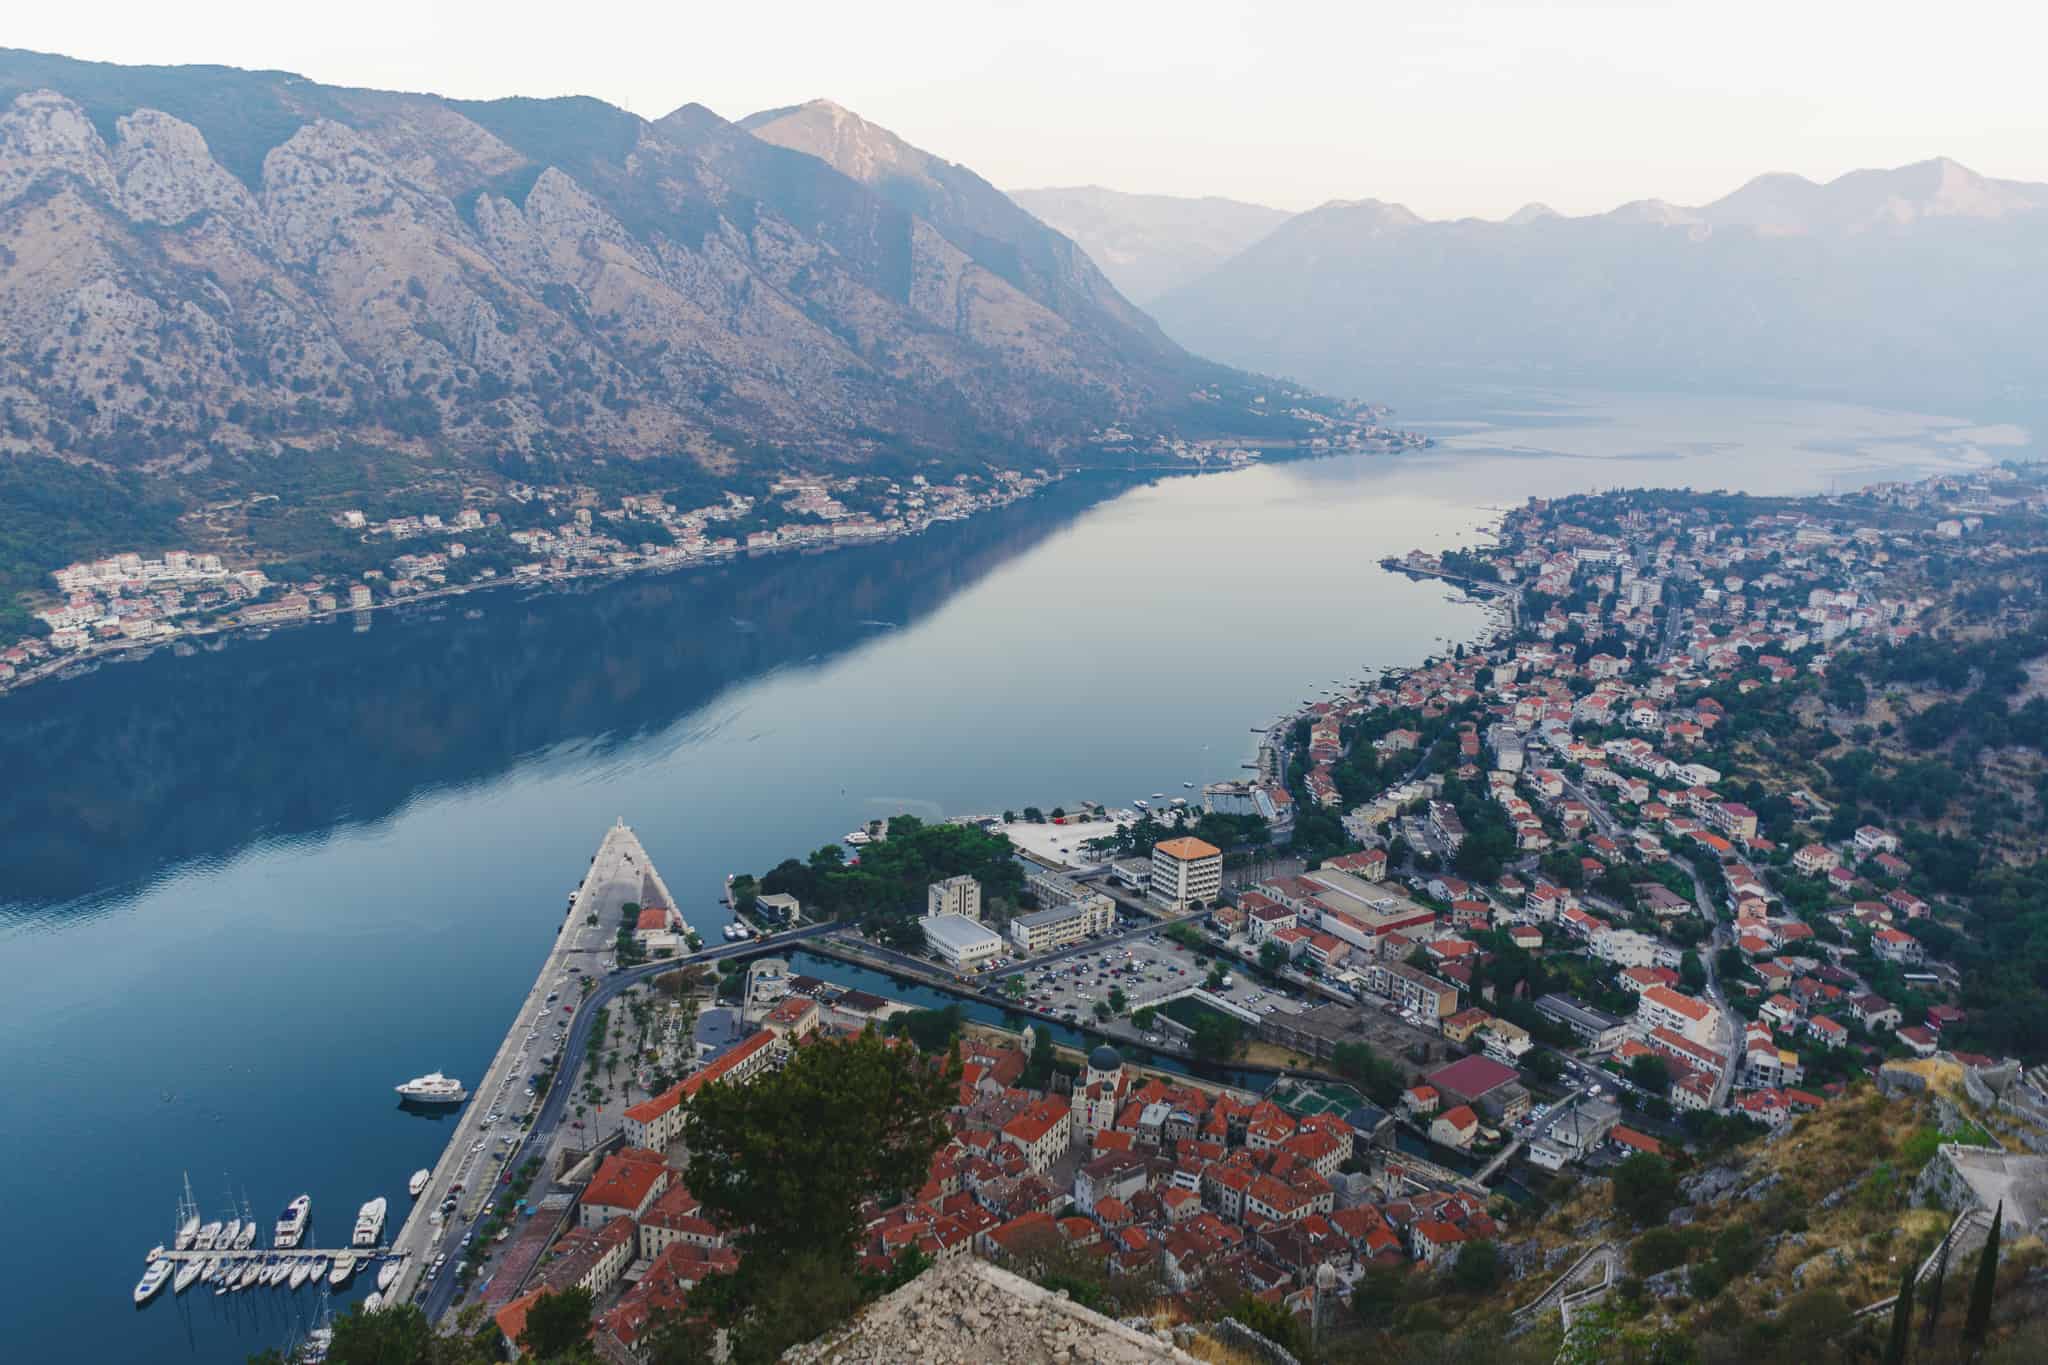 Epic landscape shot of the Bay of Kotor in Montenegro in the morning at the top of the ladder of Kotor